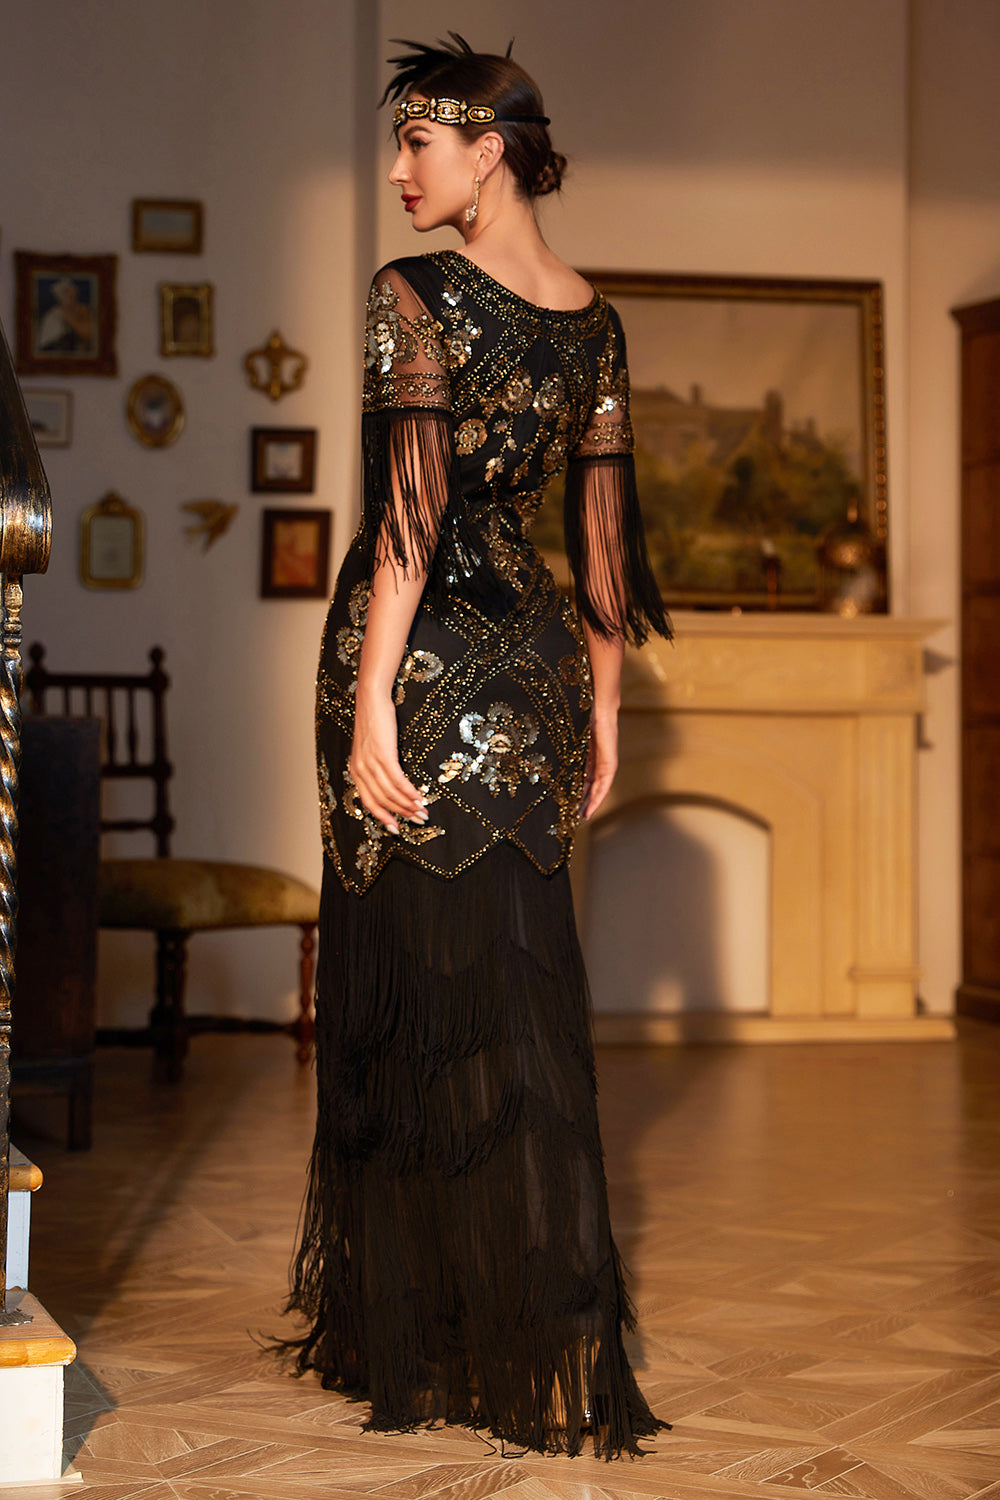 Black Sequined Fringed Long 1920s Gatsby Dress with Accessories Set